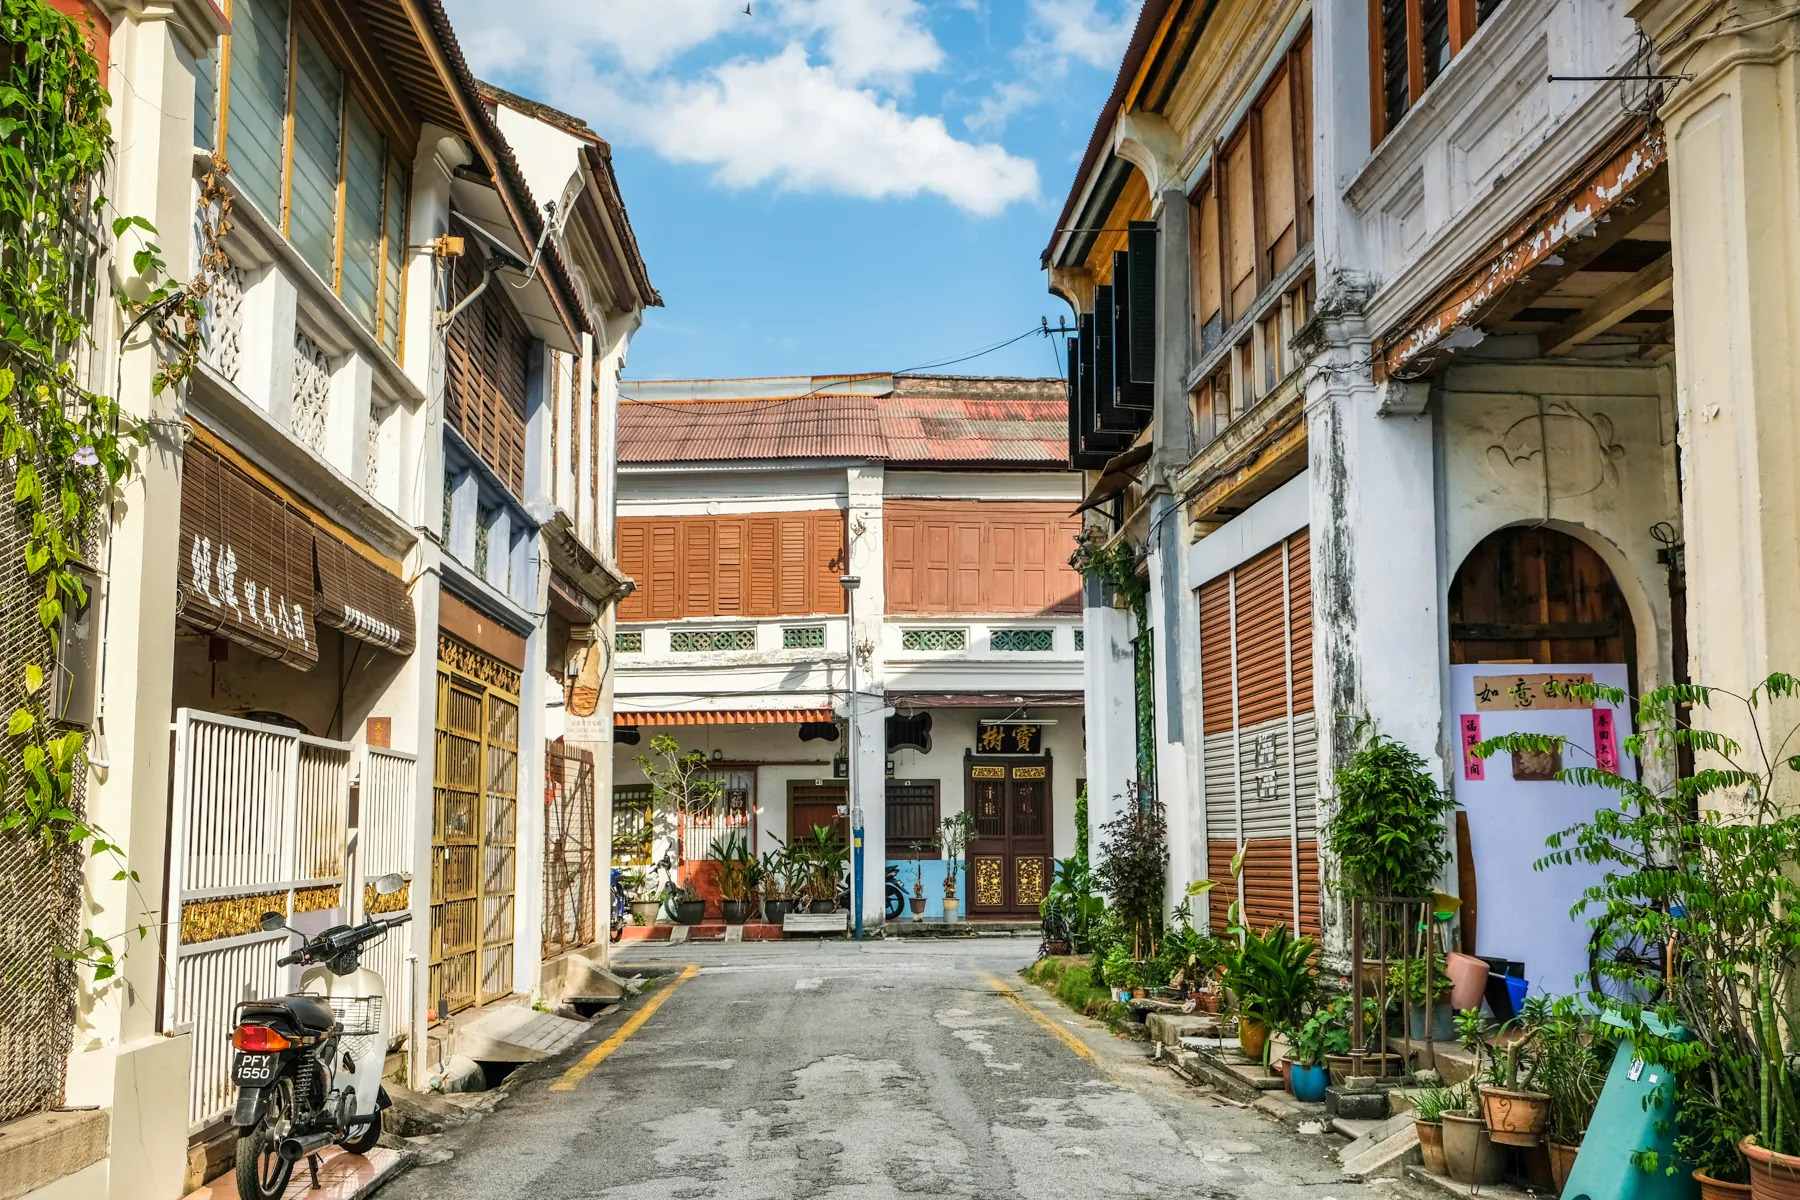 Our 3-Day PENANG Itinerary